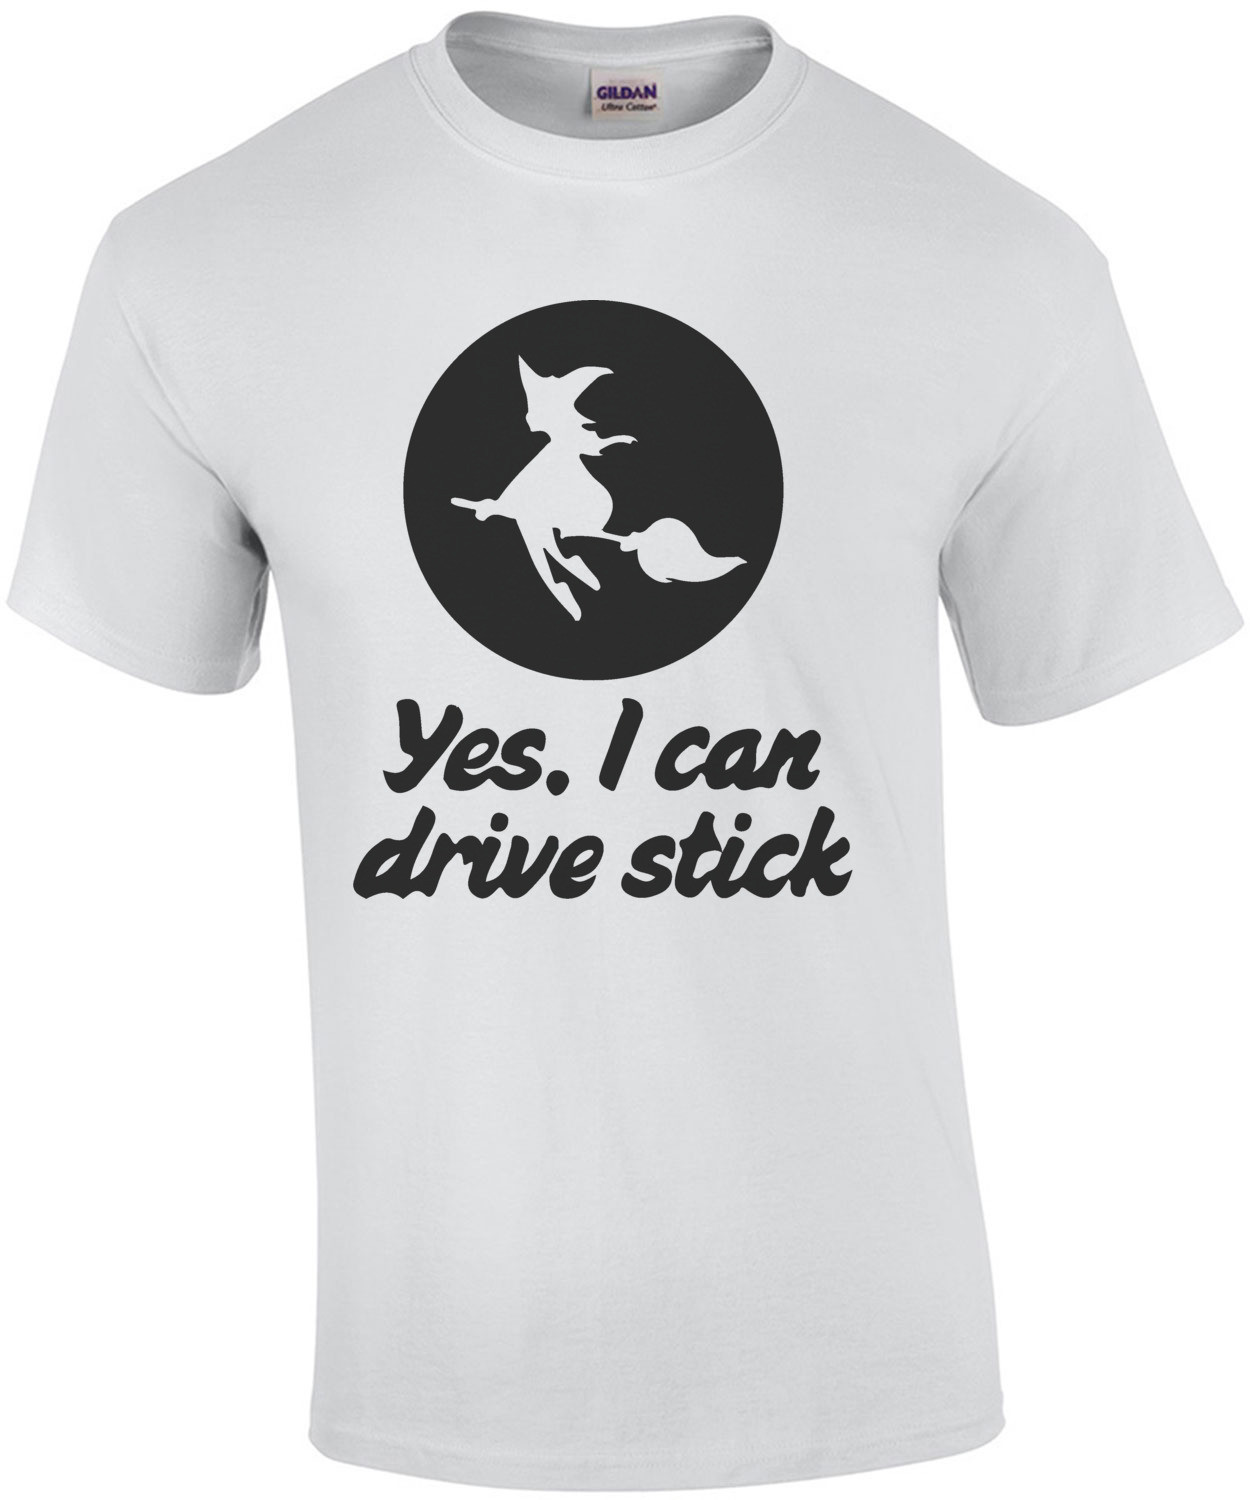 Yes, I can drive stick. Witch T-Shirt